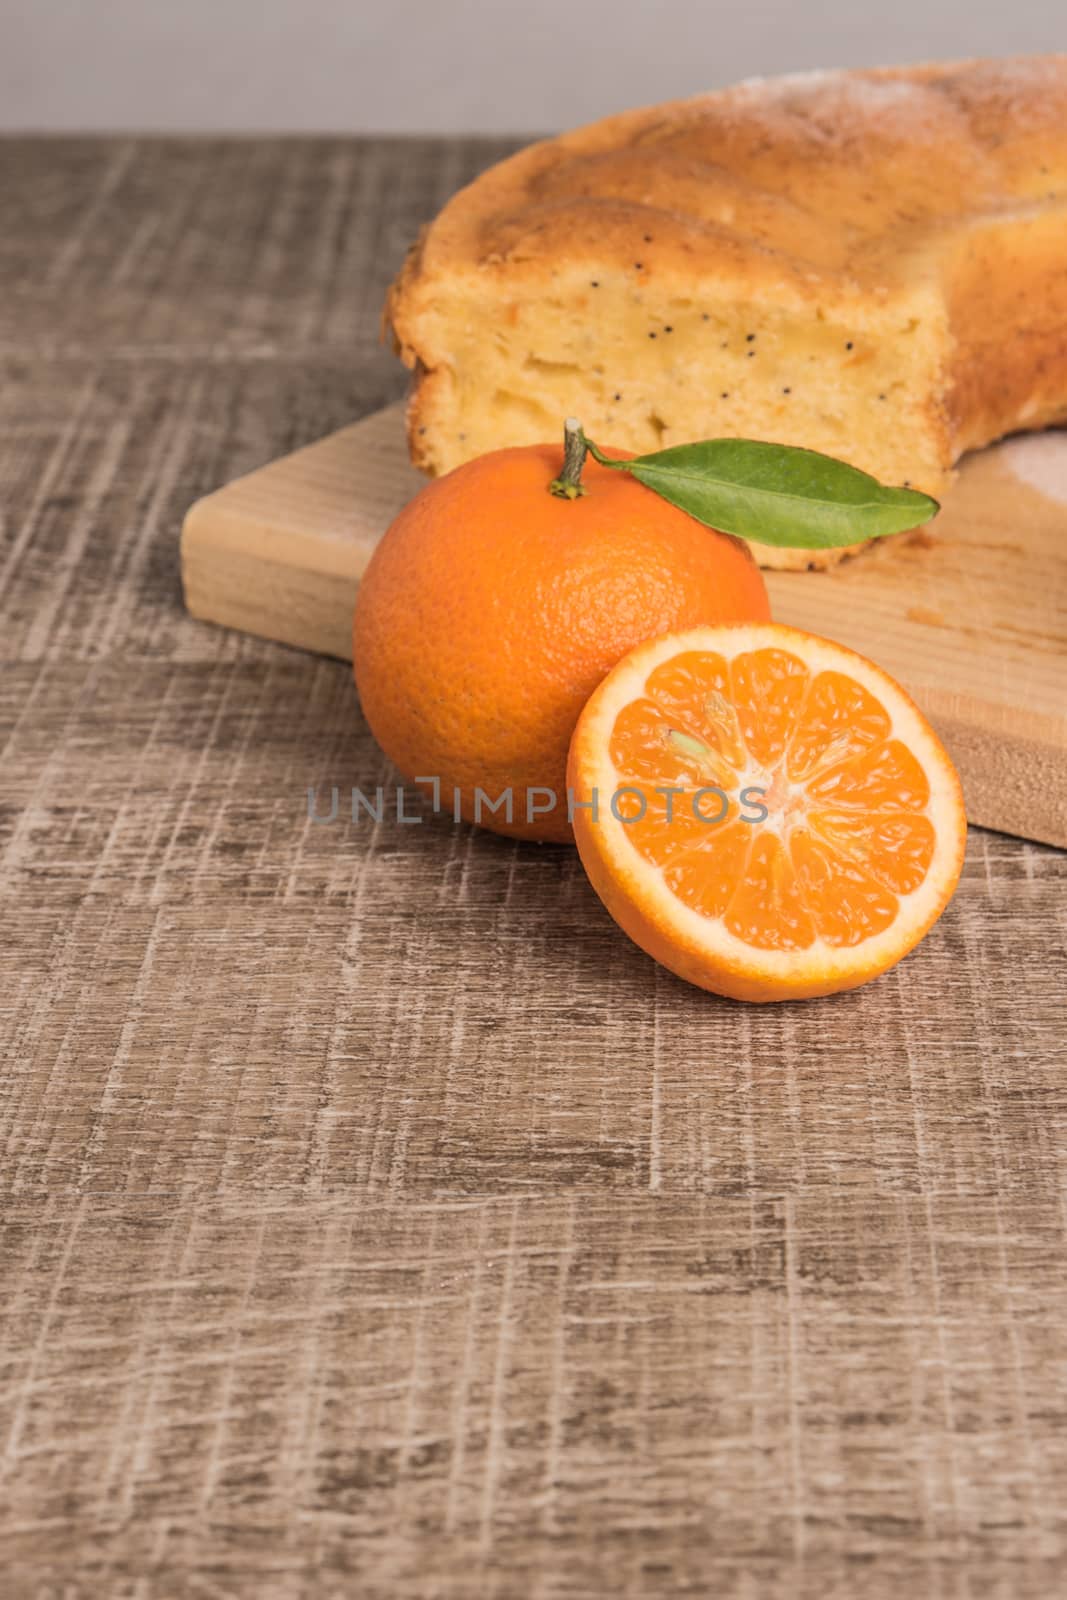 Slices of clementine cake with powdered sugar topping. Cake on a by AnaMarques